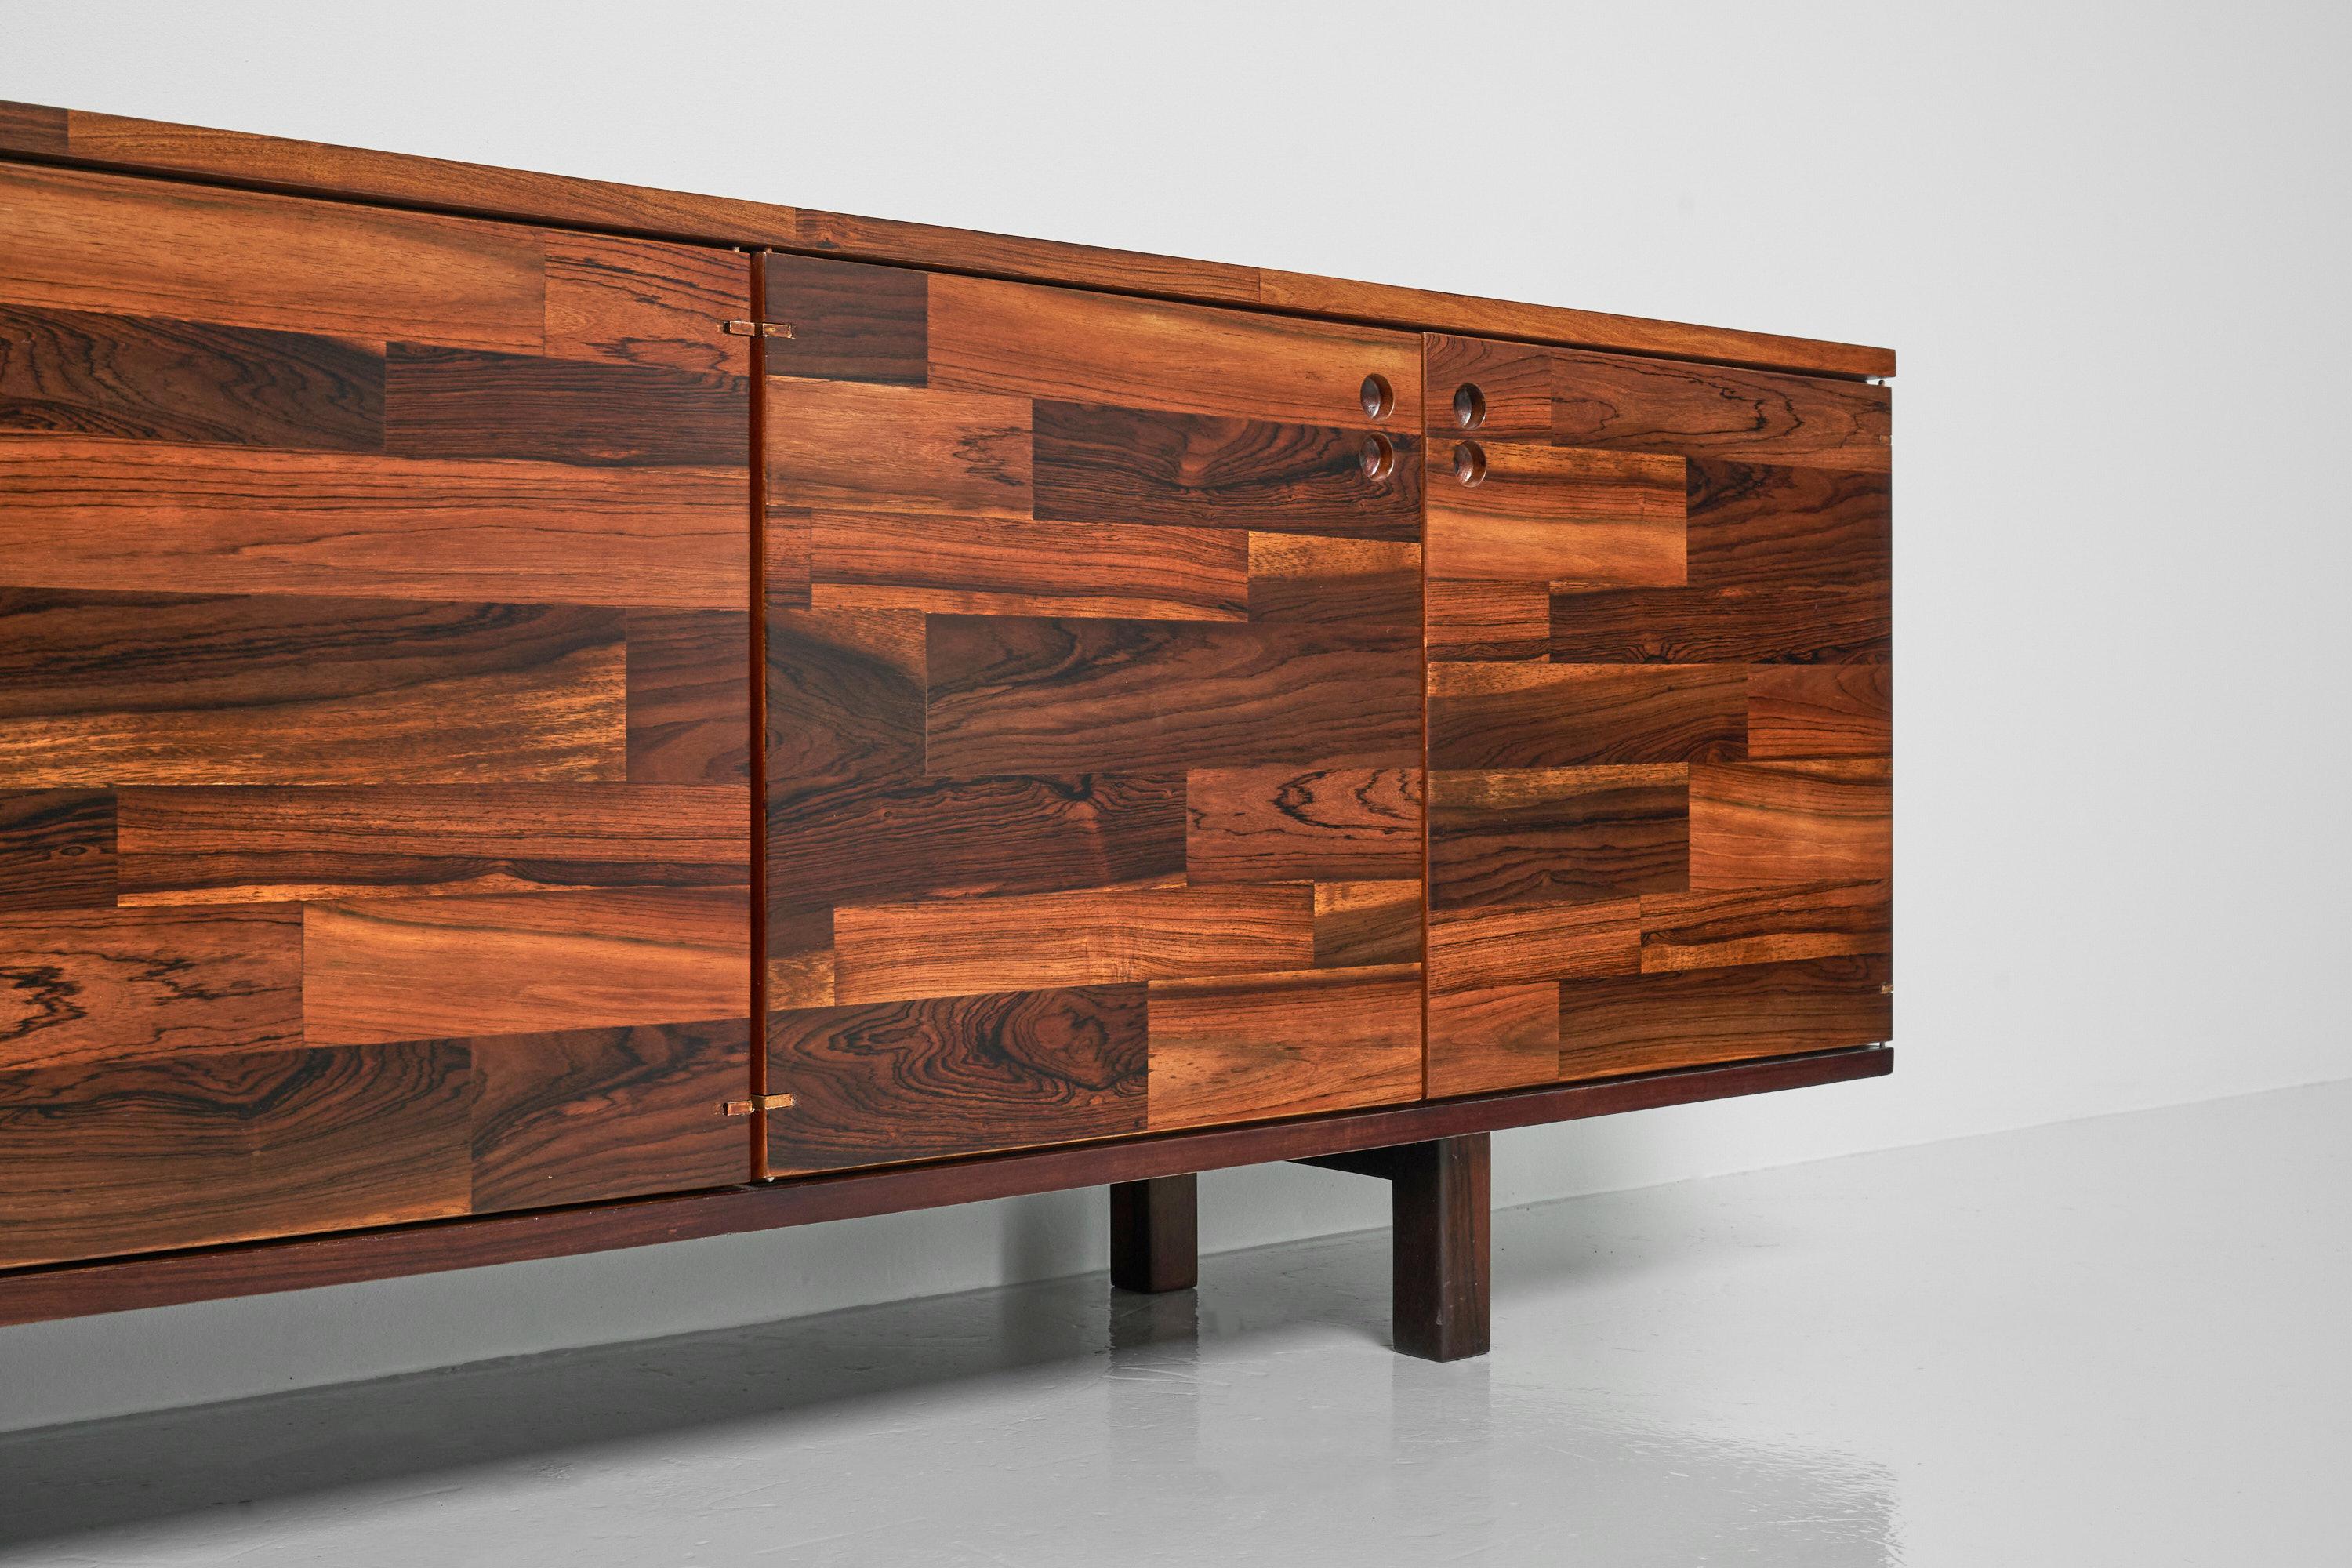 Beautiful patched and sophisticated sideboard from the componivel series designed by Jorge Zalszupin and manufactured by his own company L'Atelier, Brazil 1959. Modular furniture by Jorge is instantly recognizable, as he was the first one to come up